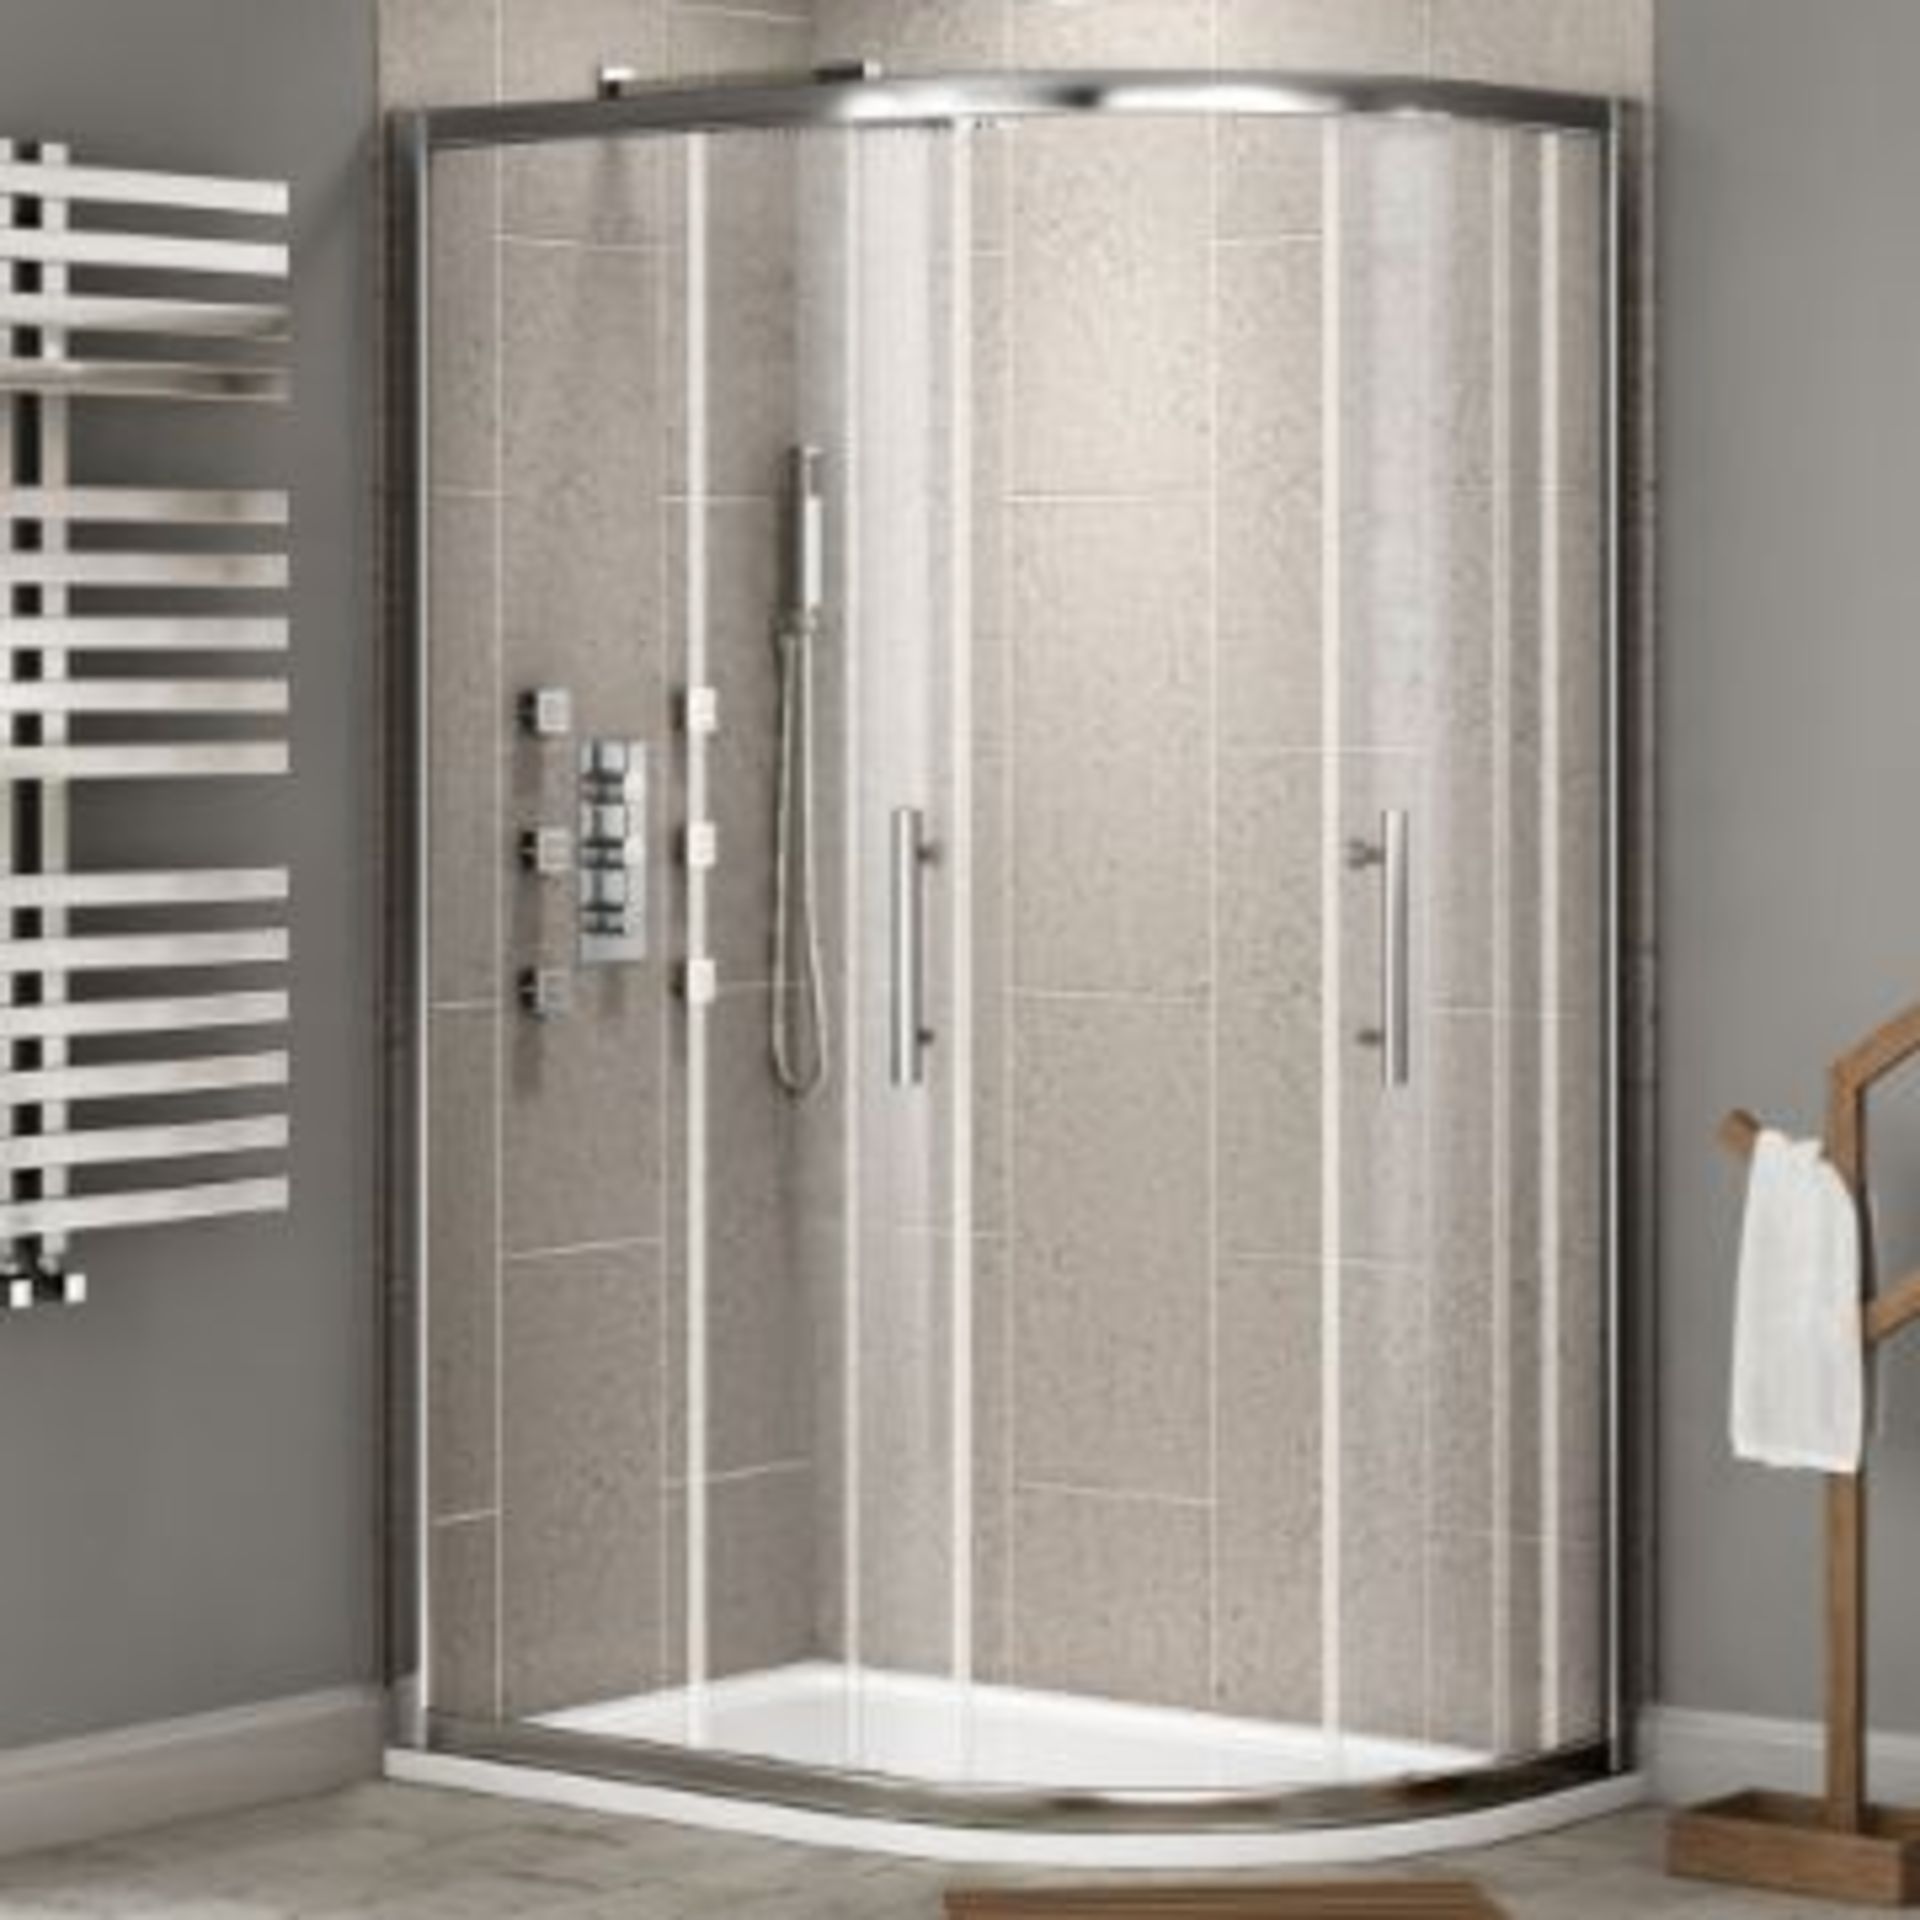 Twyford's 900x800 mm - 8 mm - Premium Easy clean Offset Quadrant Shower Enclosure - Reversible. RRP - Image 2 of 3